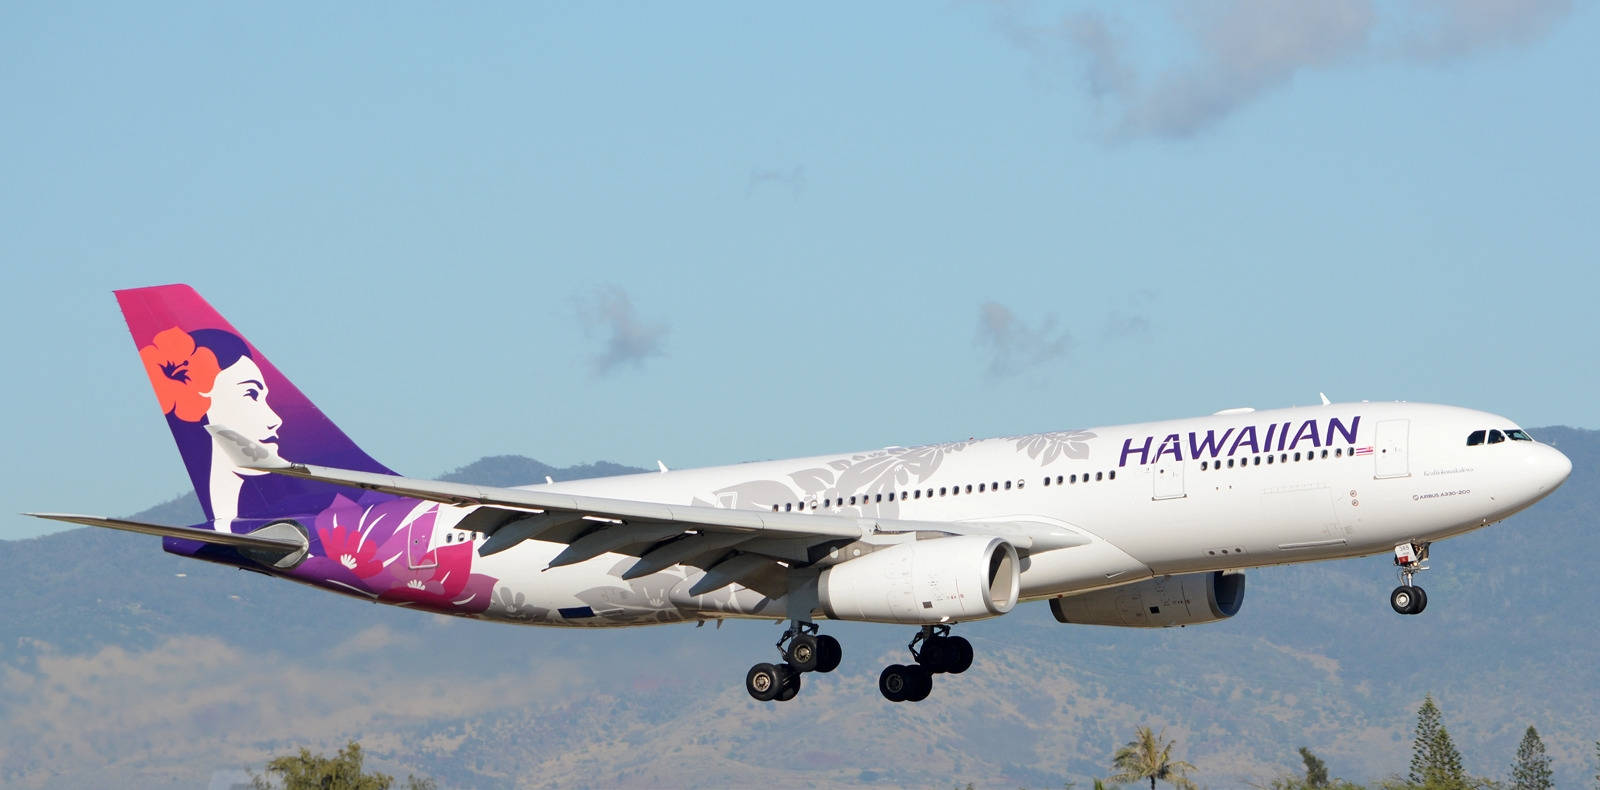 View Of A Hawaiian Airlines Plane Taking Off Wallpaper